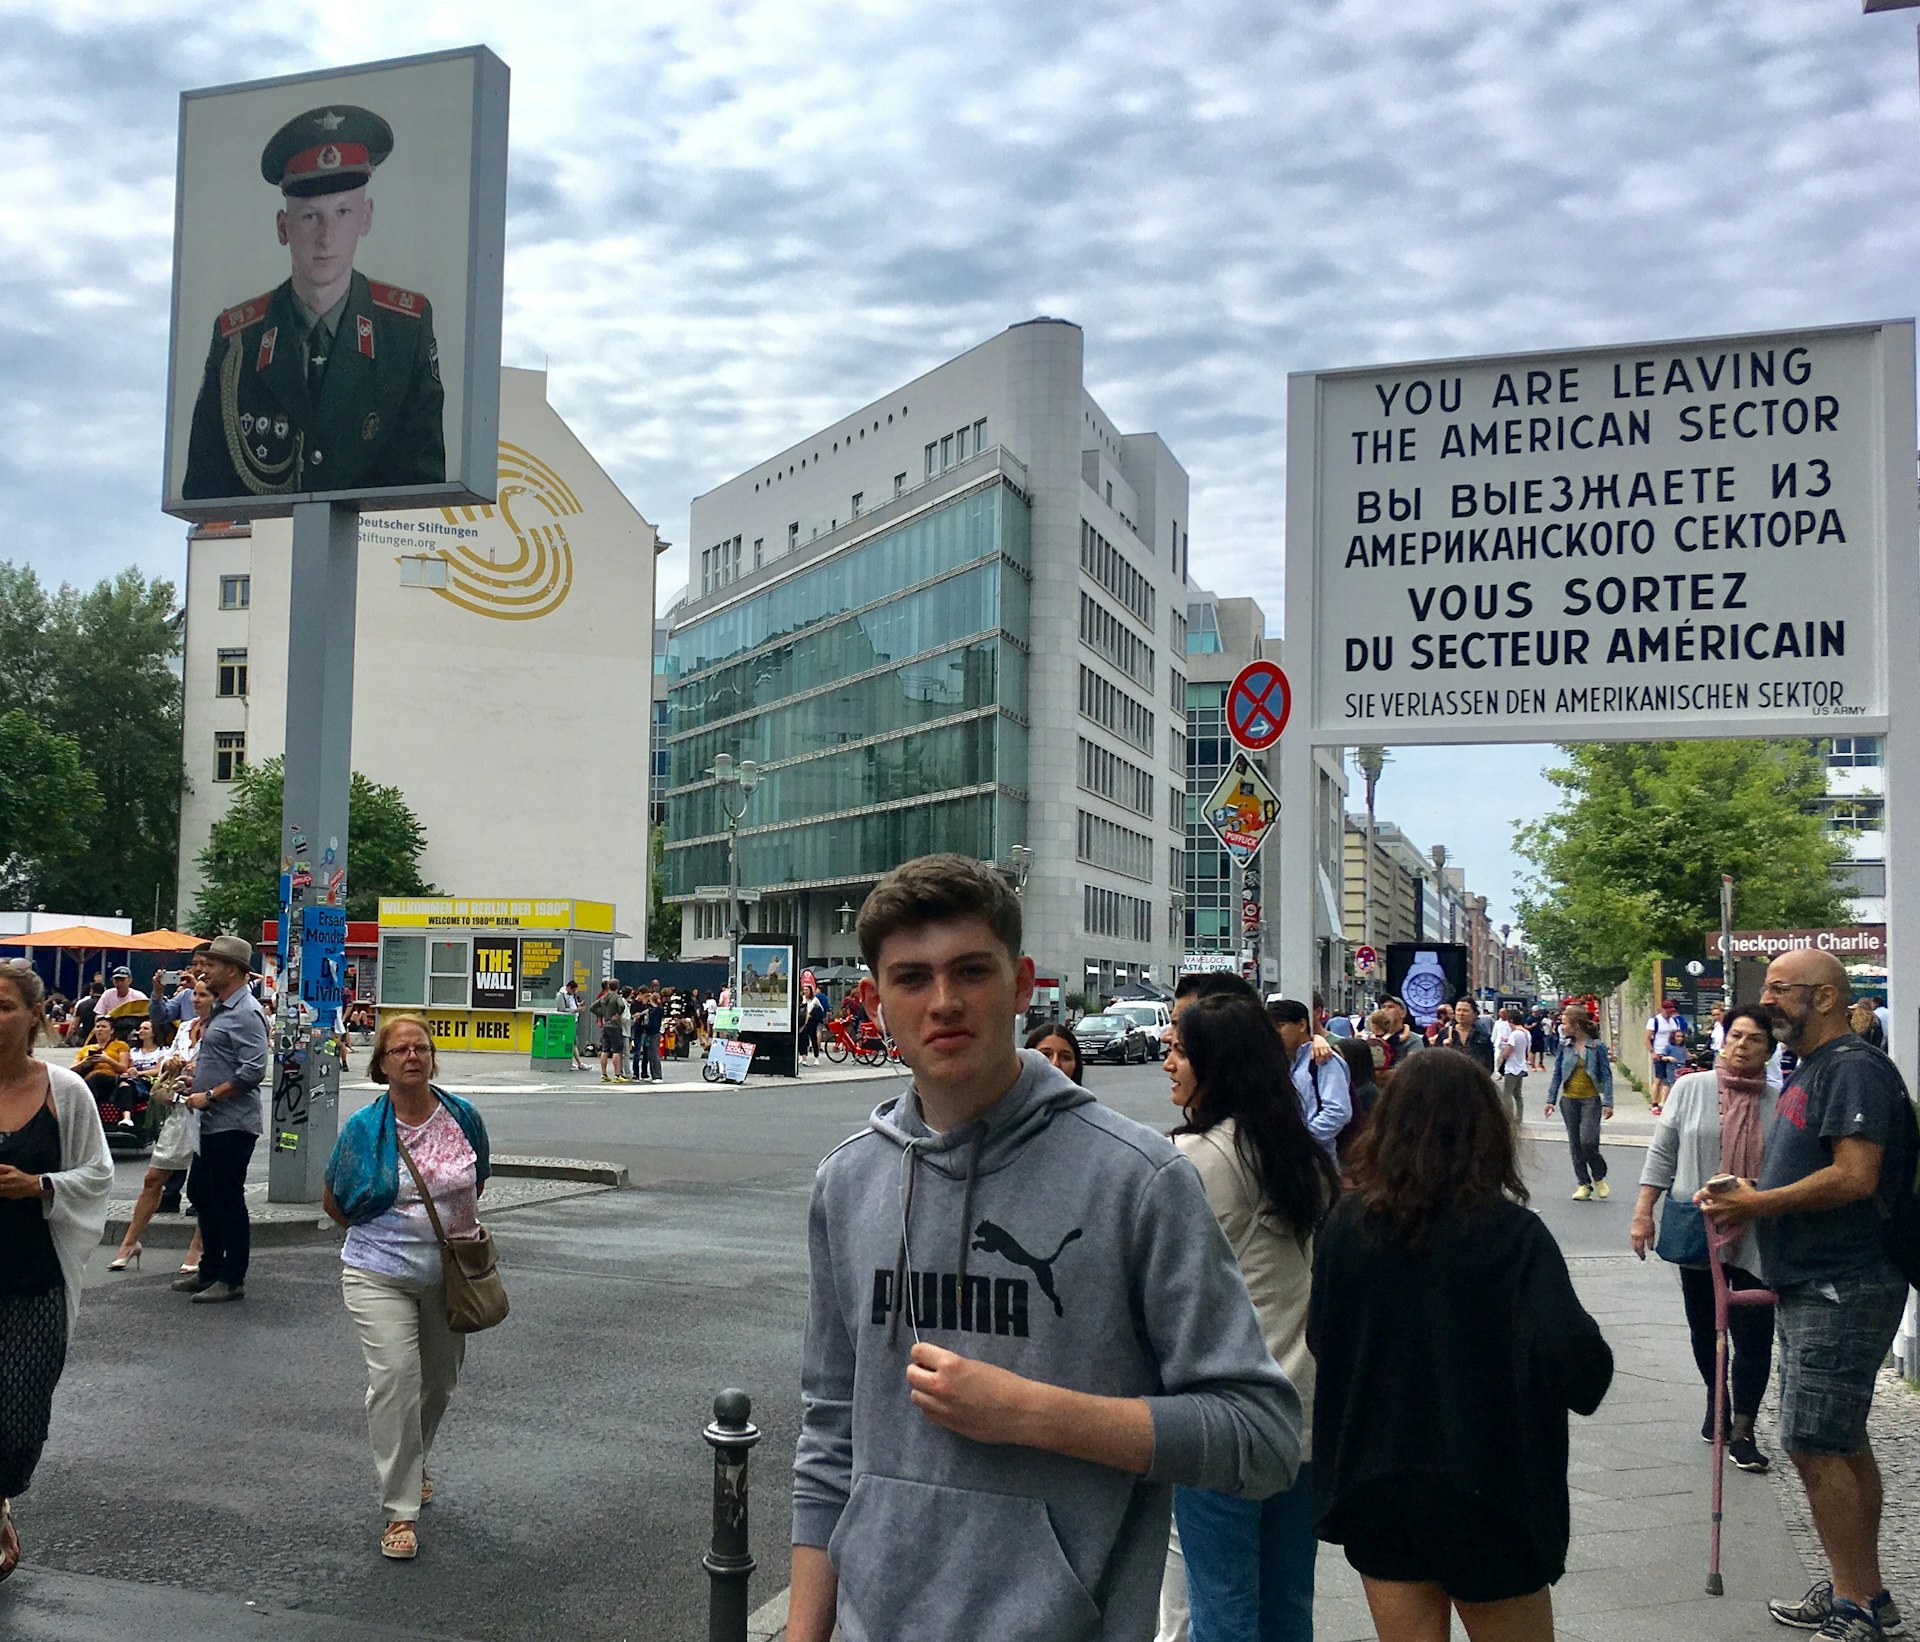 A teenage boy stands with many other people who are assembled at Berlin's Checkpoint Charlie.